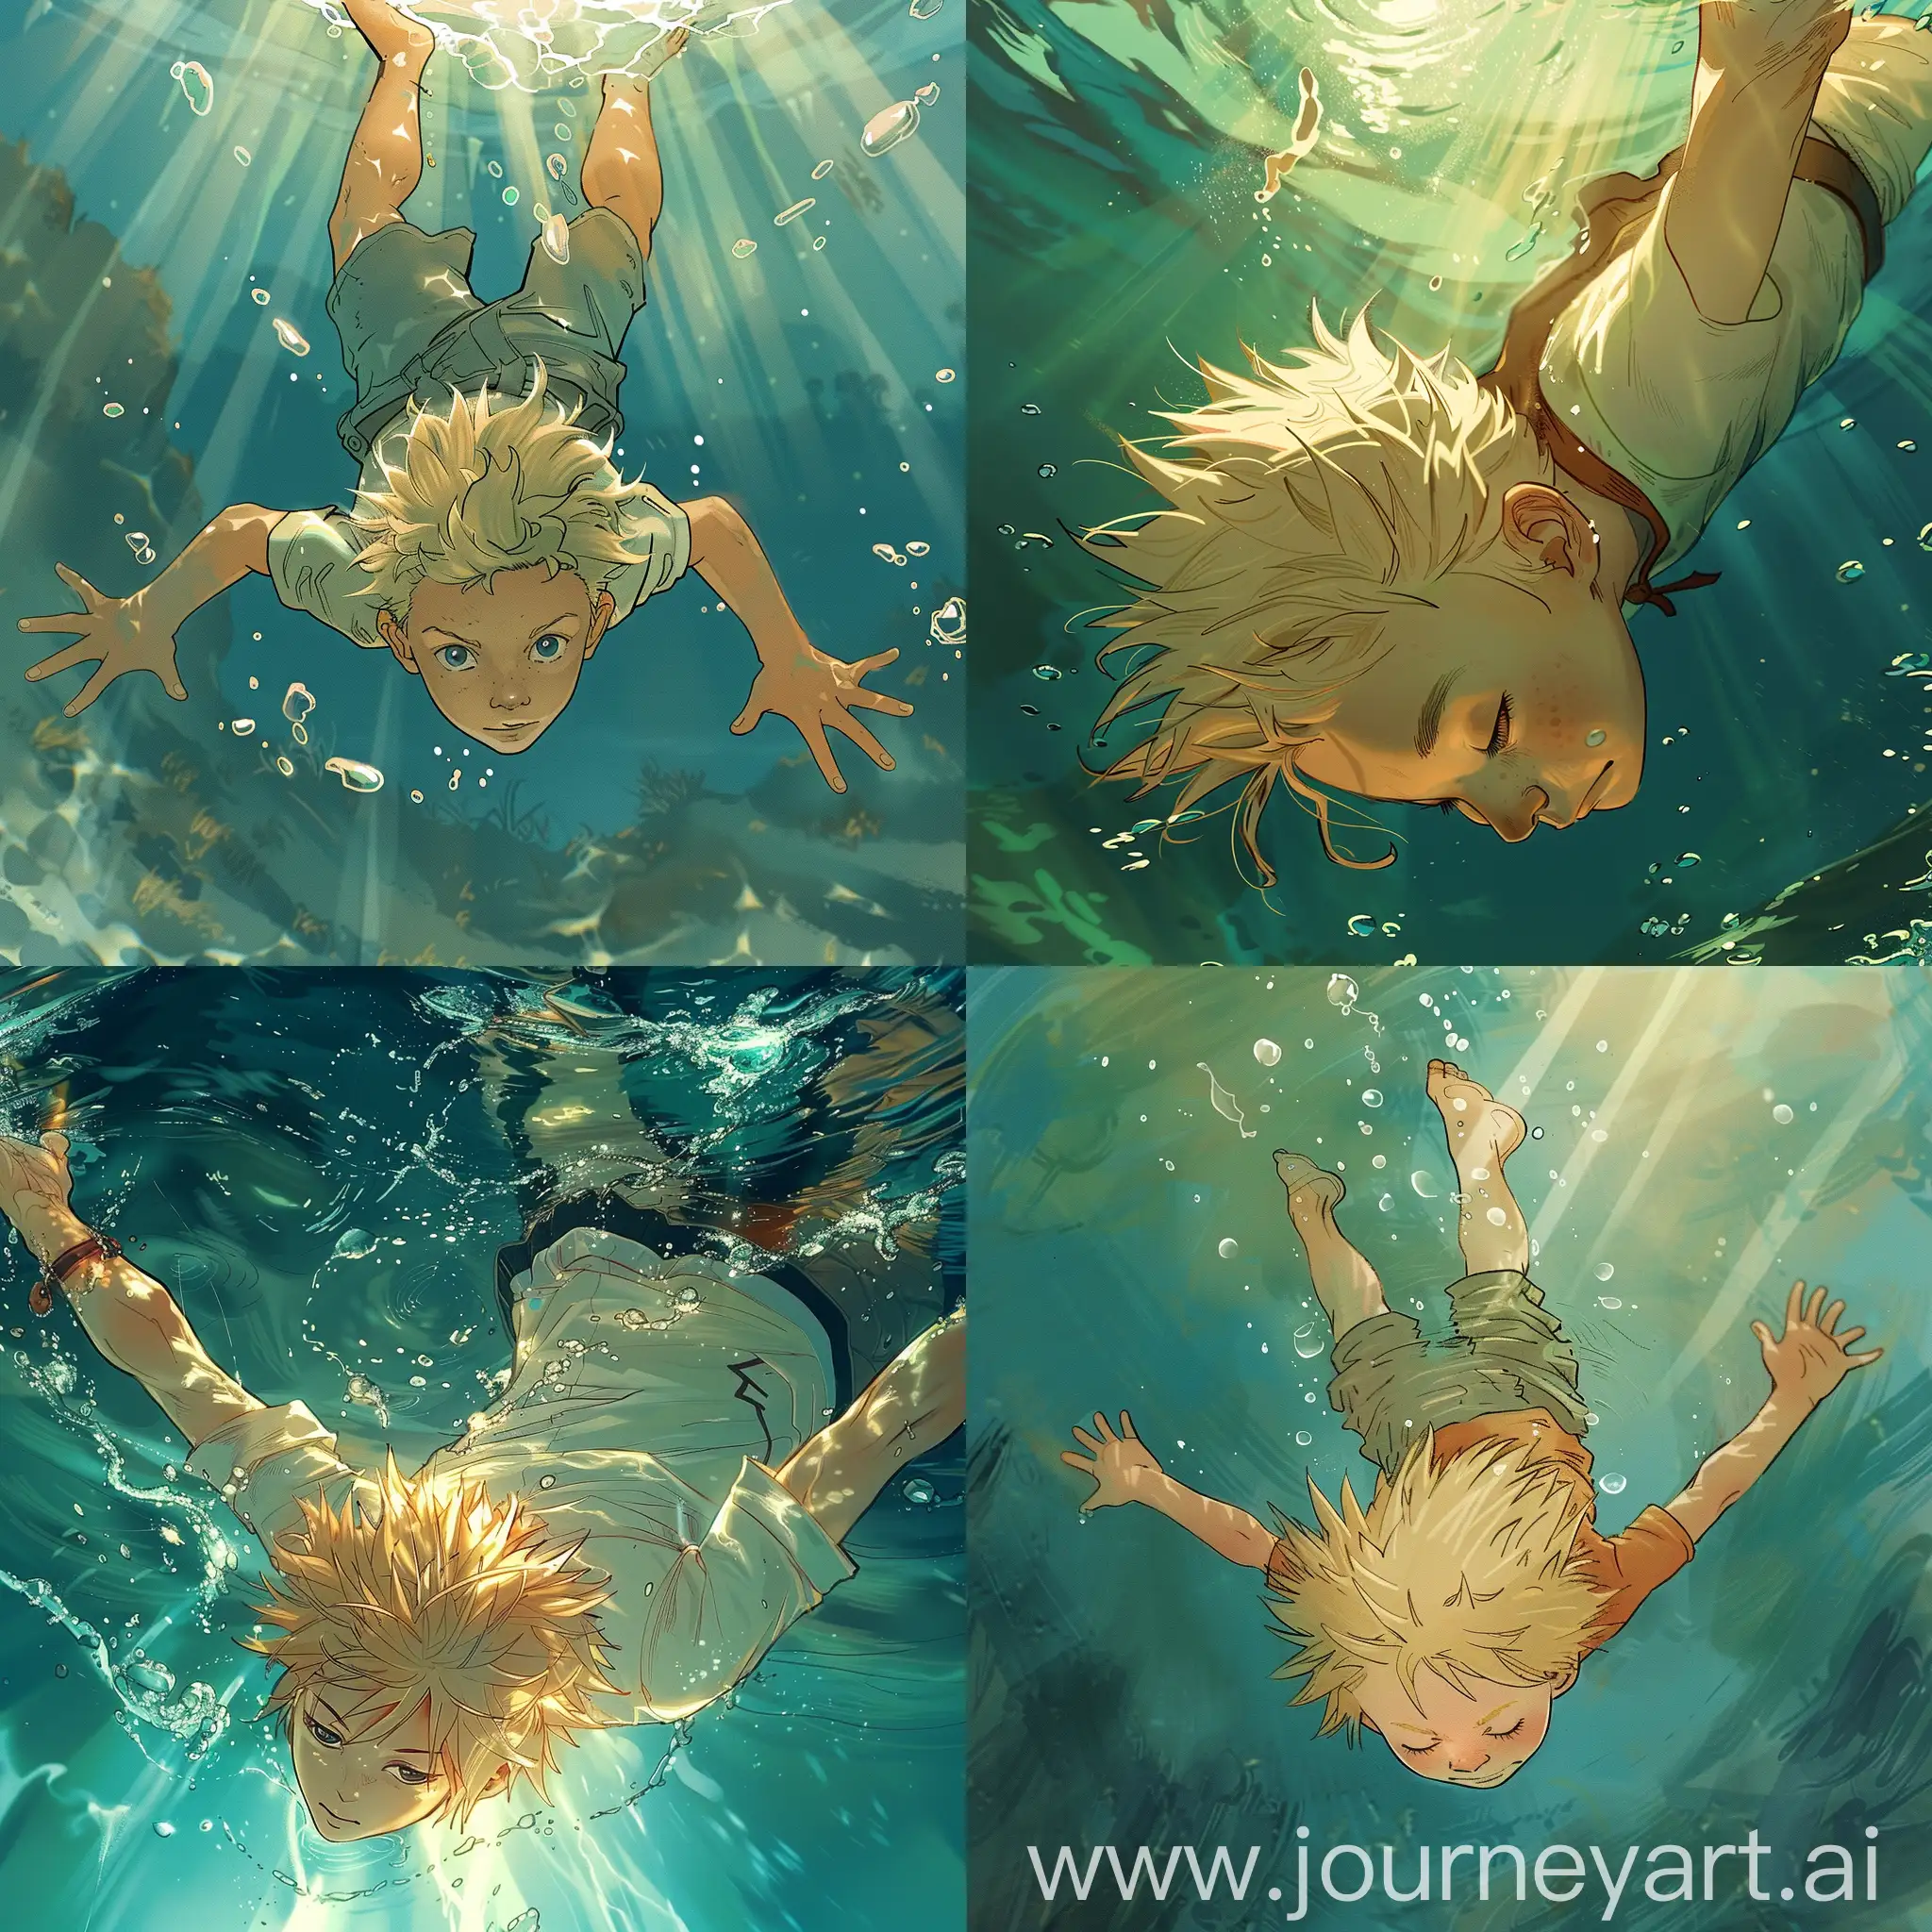 Ethereal-Illustration-of-a-SpikyHaired-Boy-Swimming-Underwater